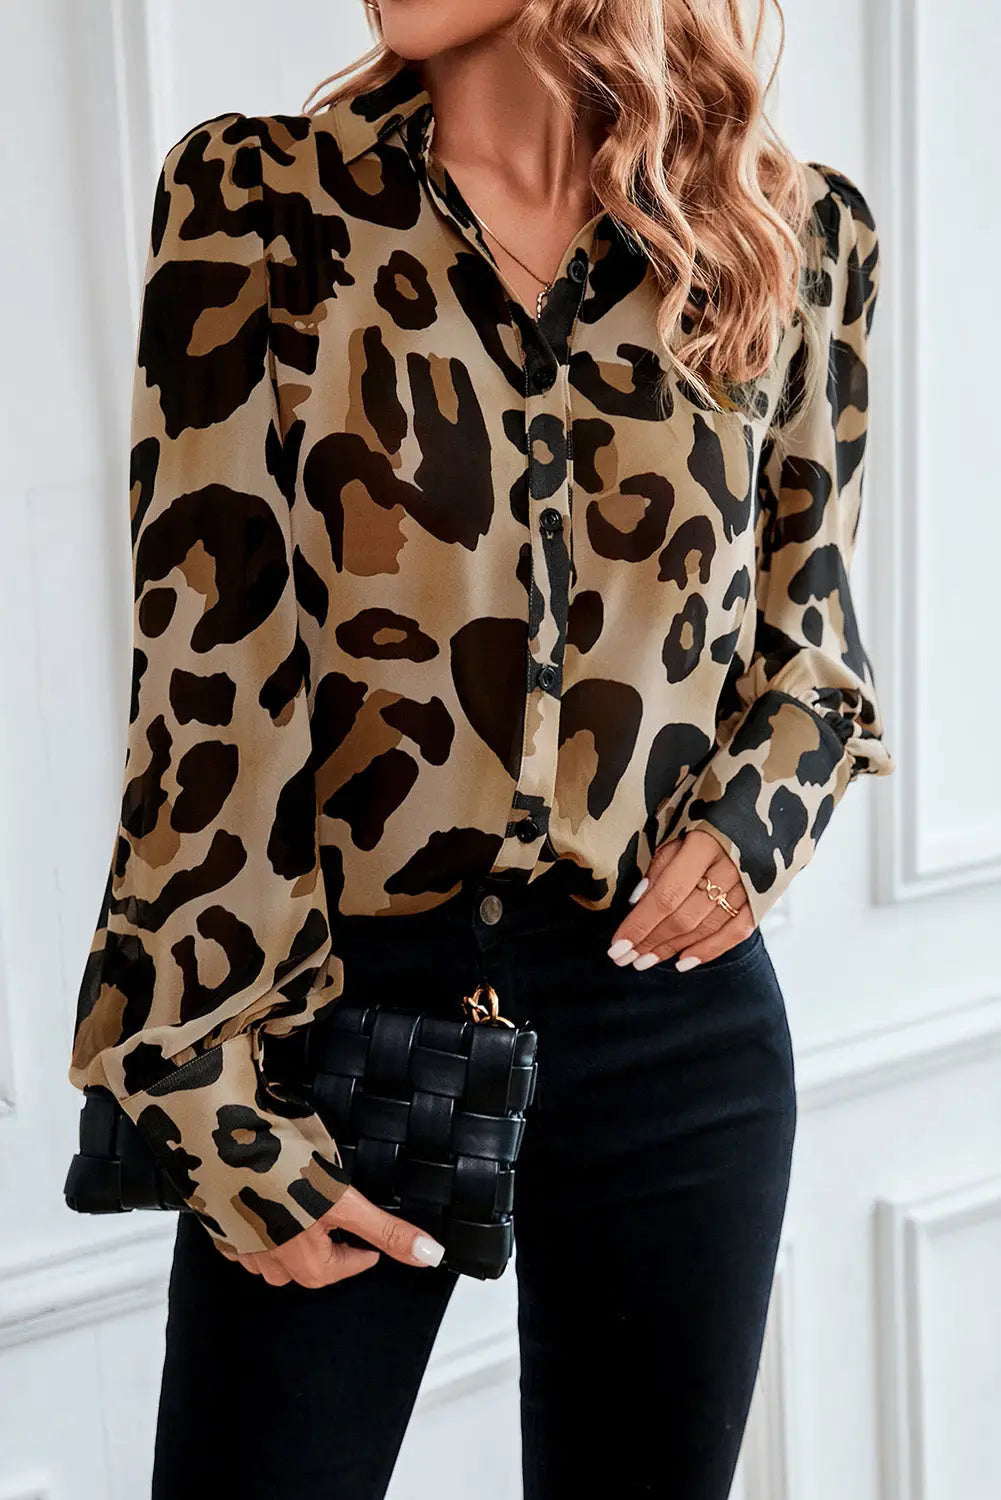 Leopard bishop sleeve button up turn down collar shirt - s / 100% polyester - tops